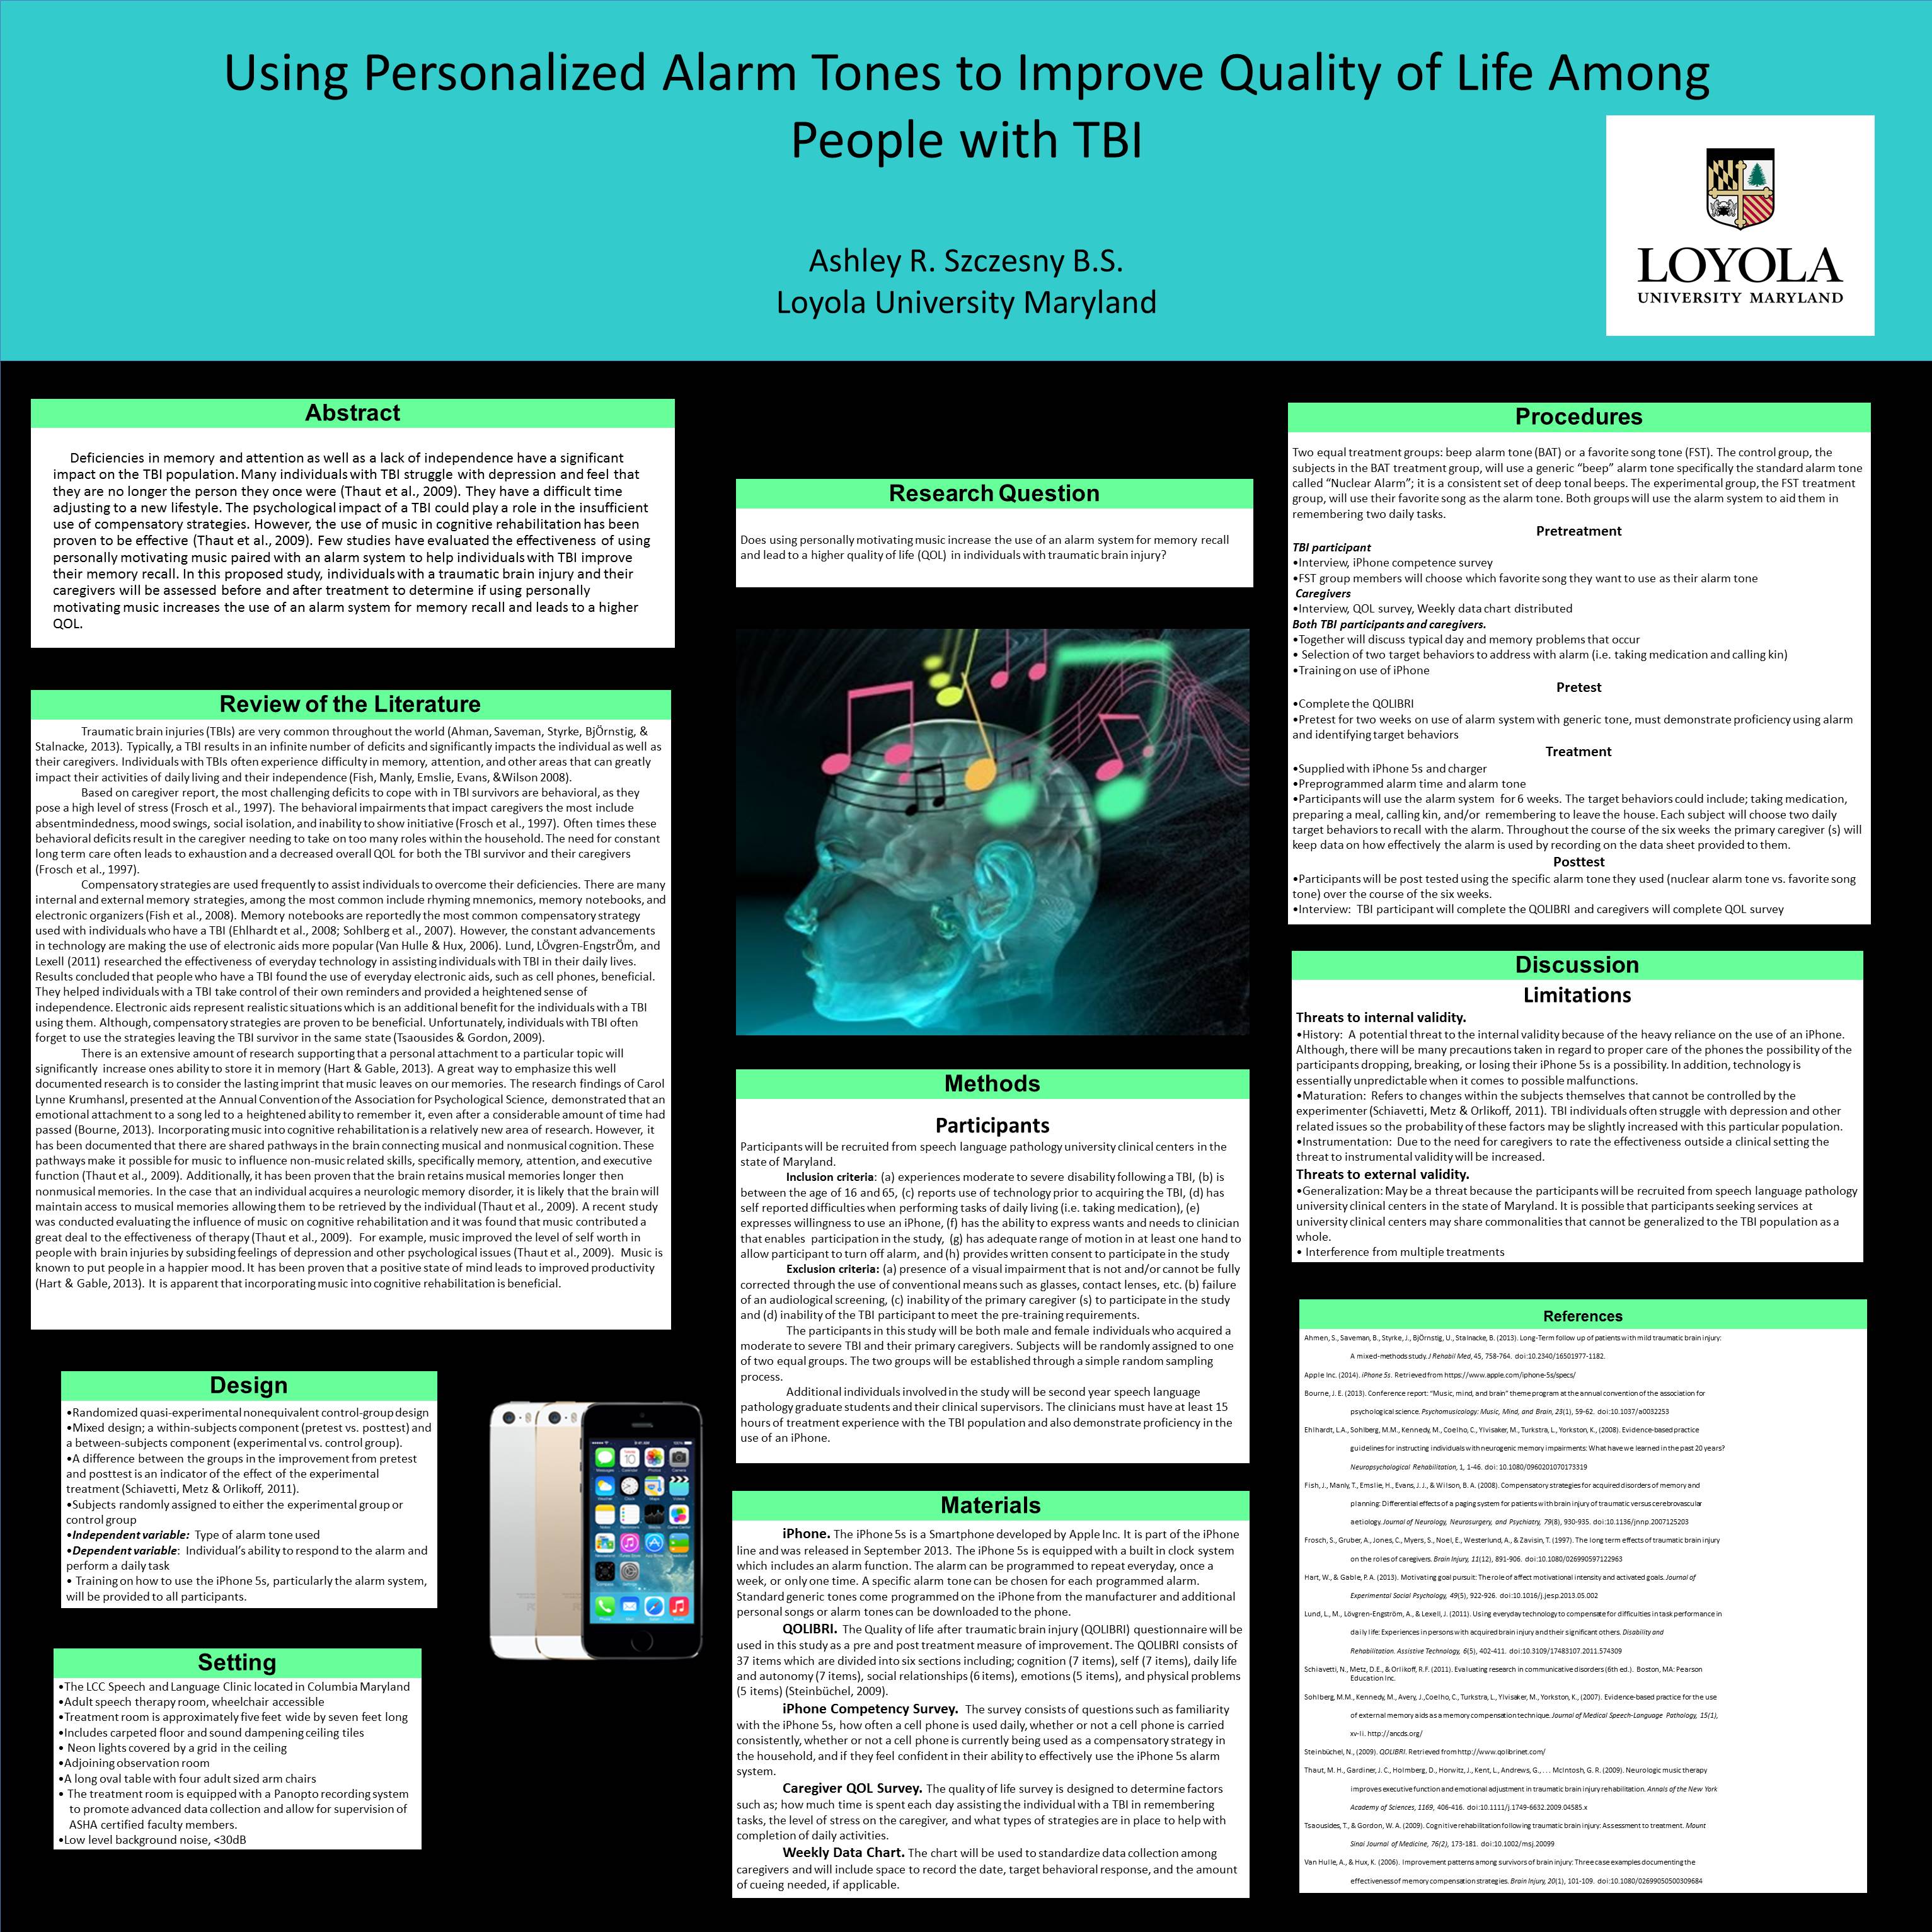 poster image: 'Using Personalized Alarm Tones to Improve Quality of Life among People with TBI'